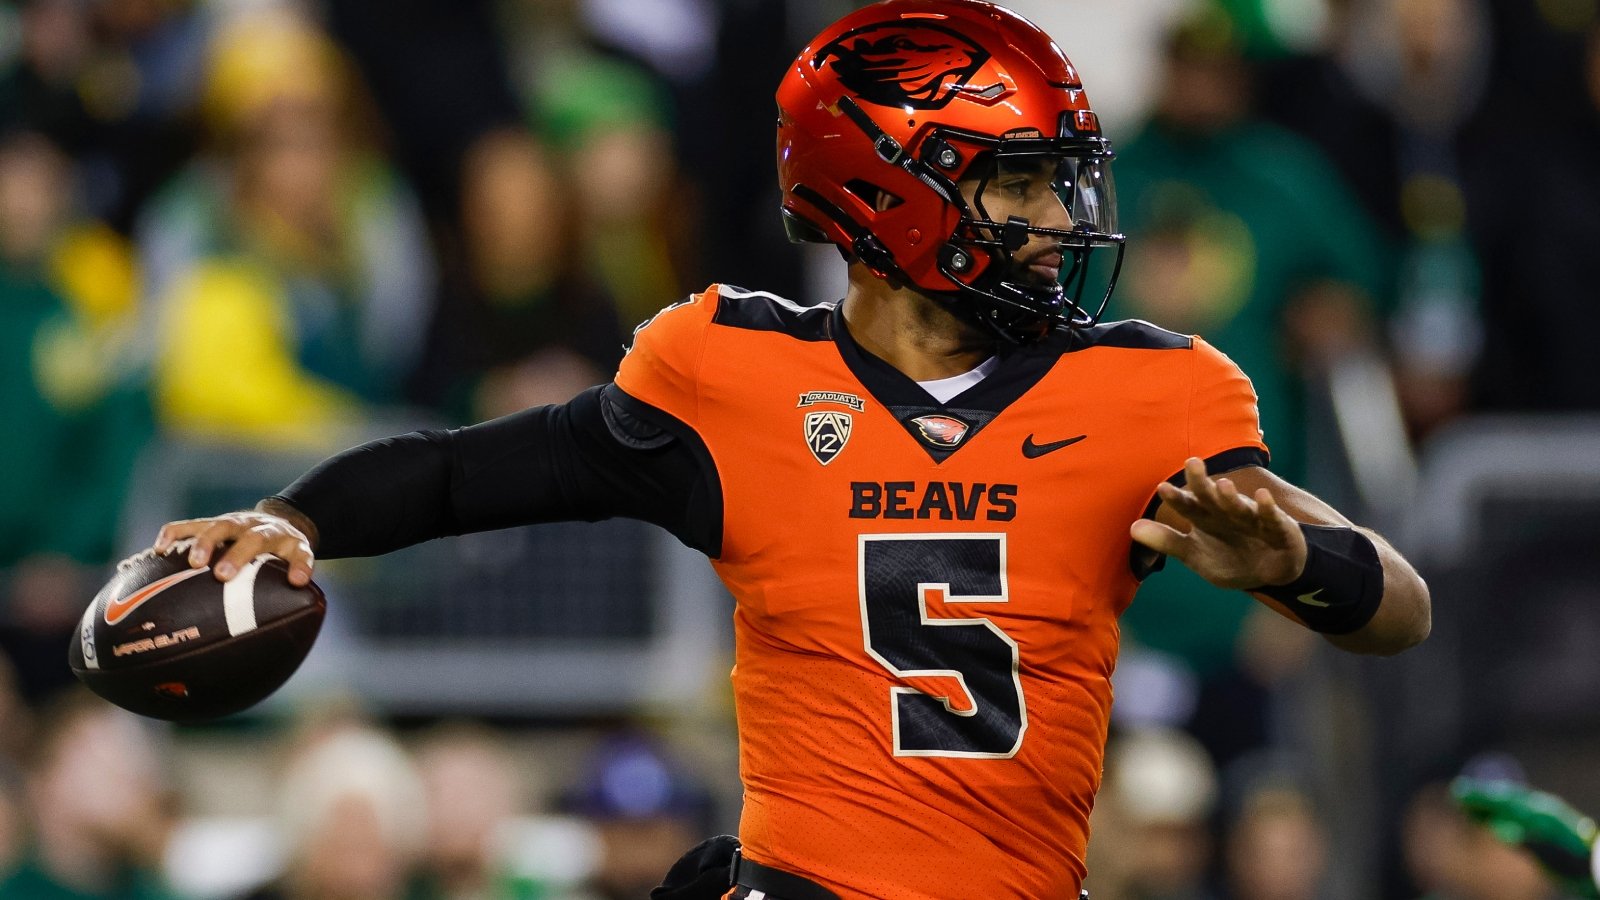 Oregon State Has Now Lost Its Conference, Coach, and Starting QB As Things Go From Bad To Worse